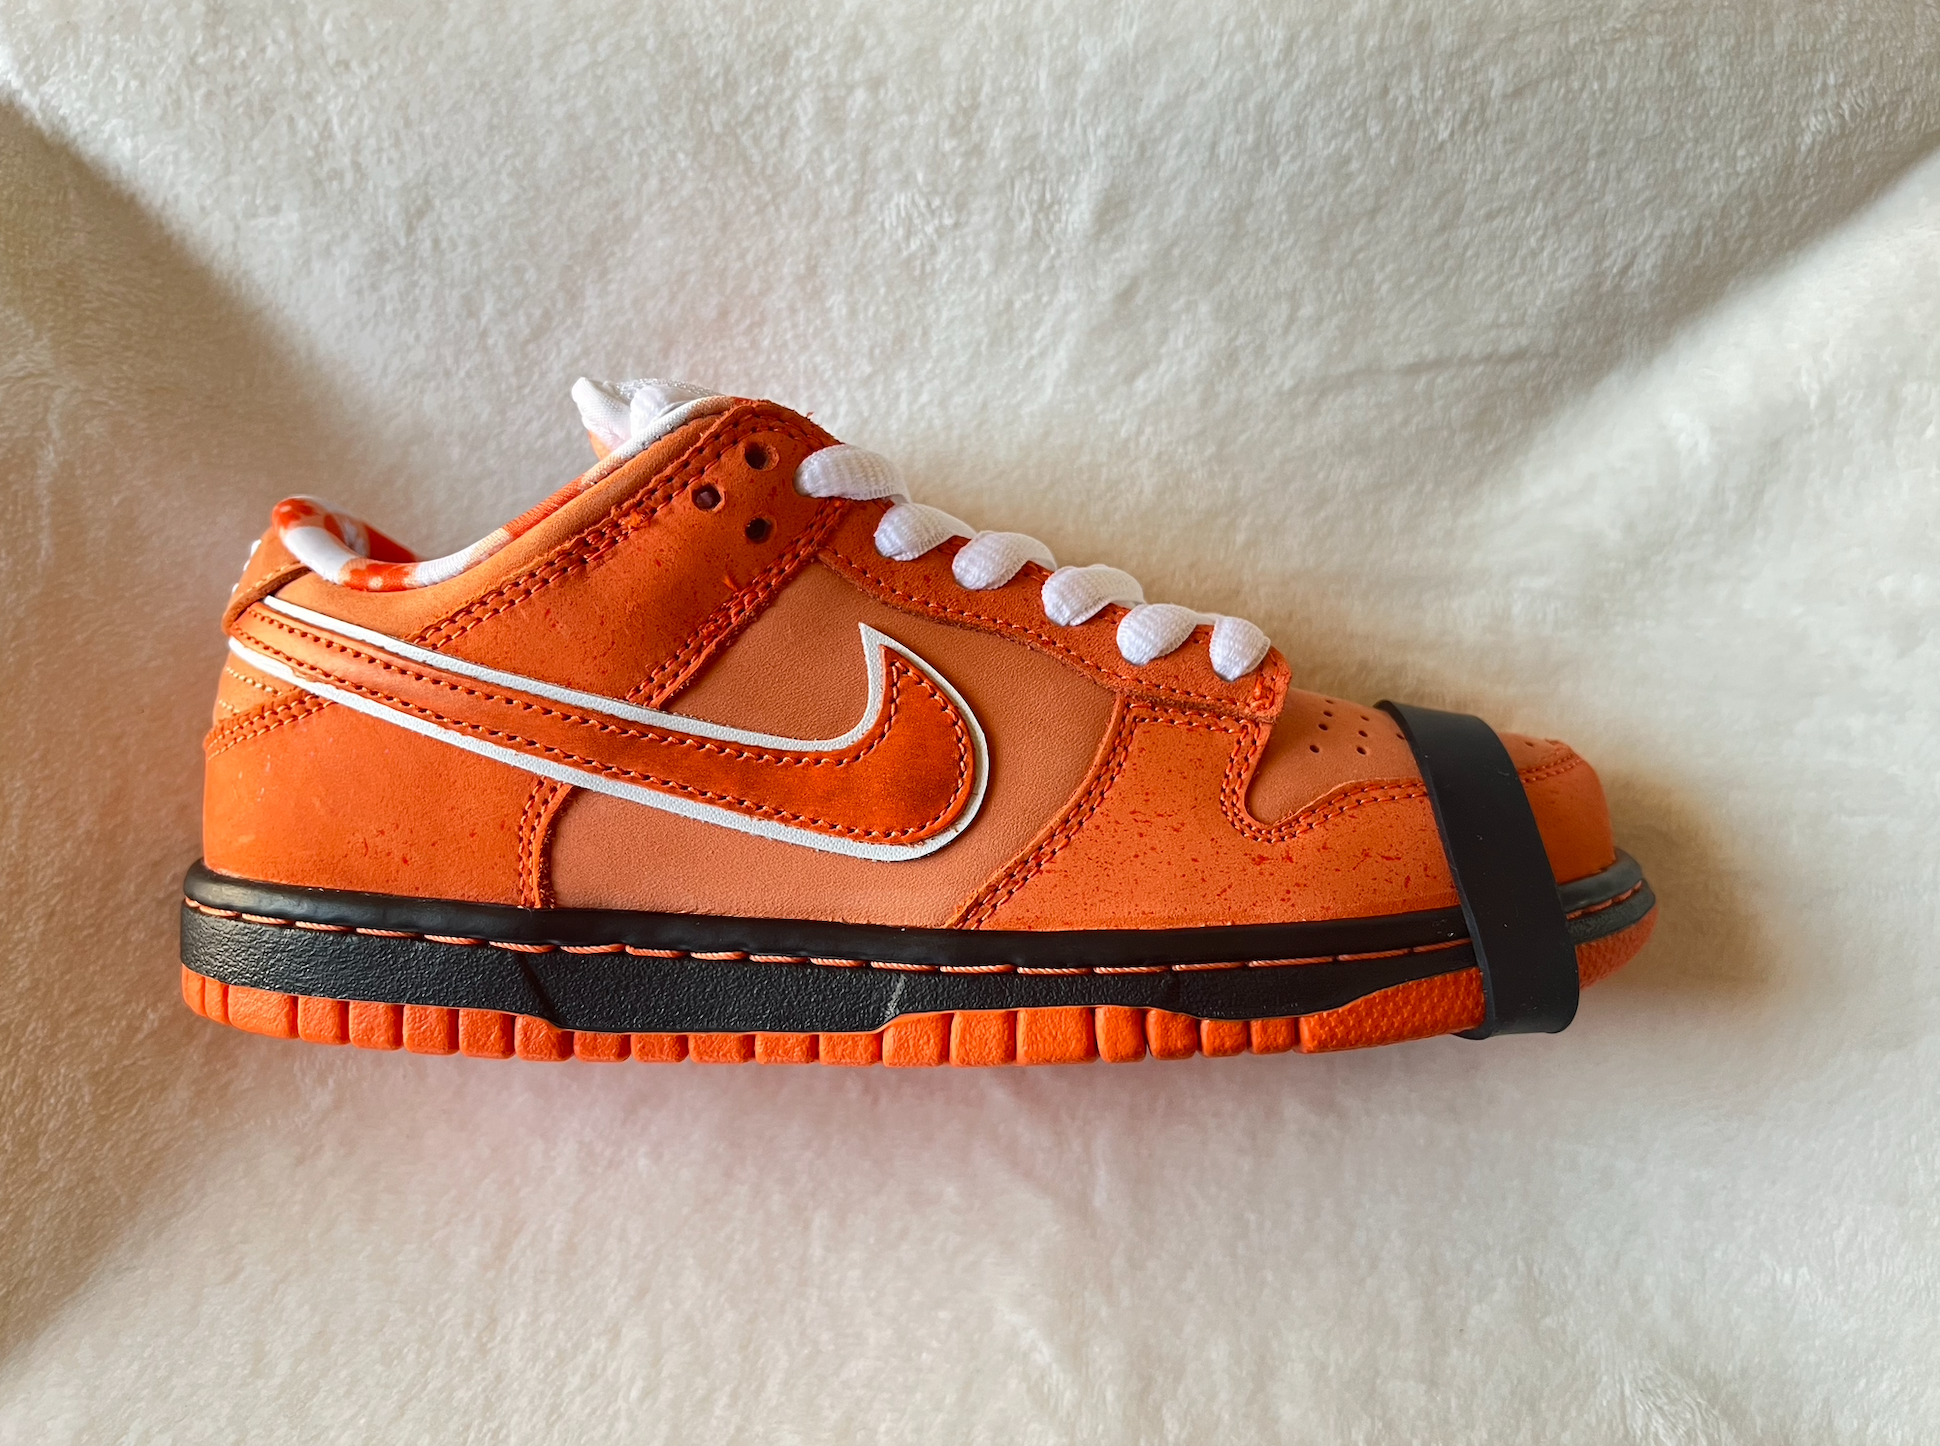 SB Dunk Low Orange (Special Box) JUST COPPED